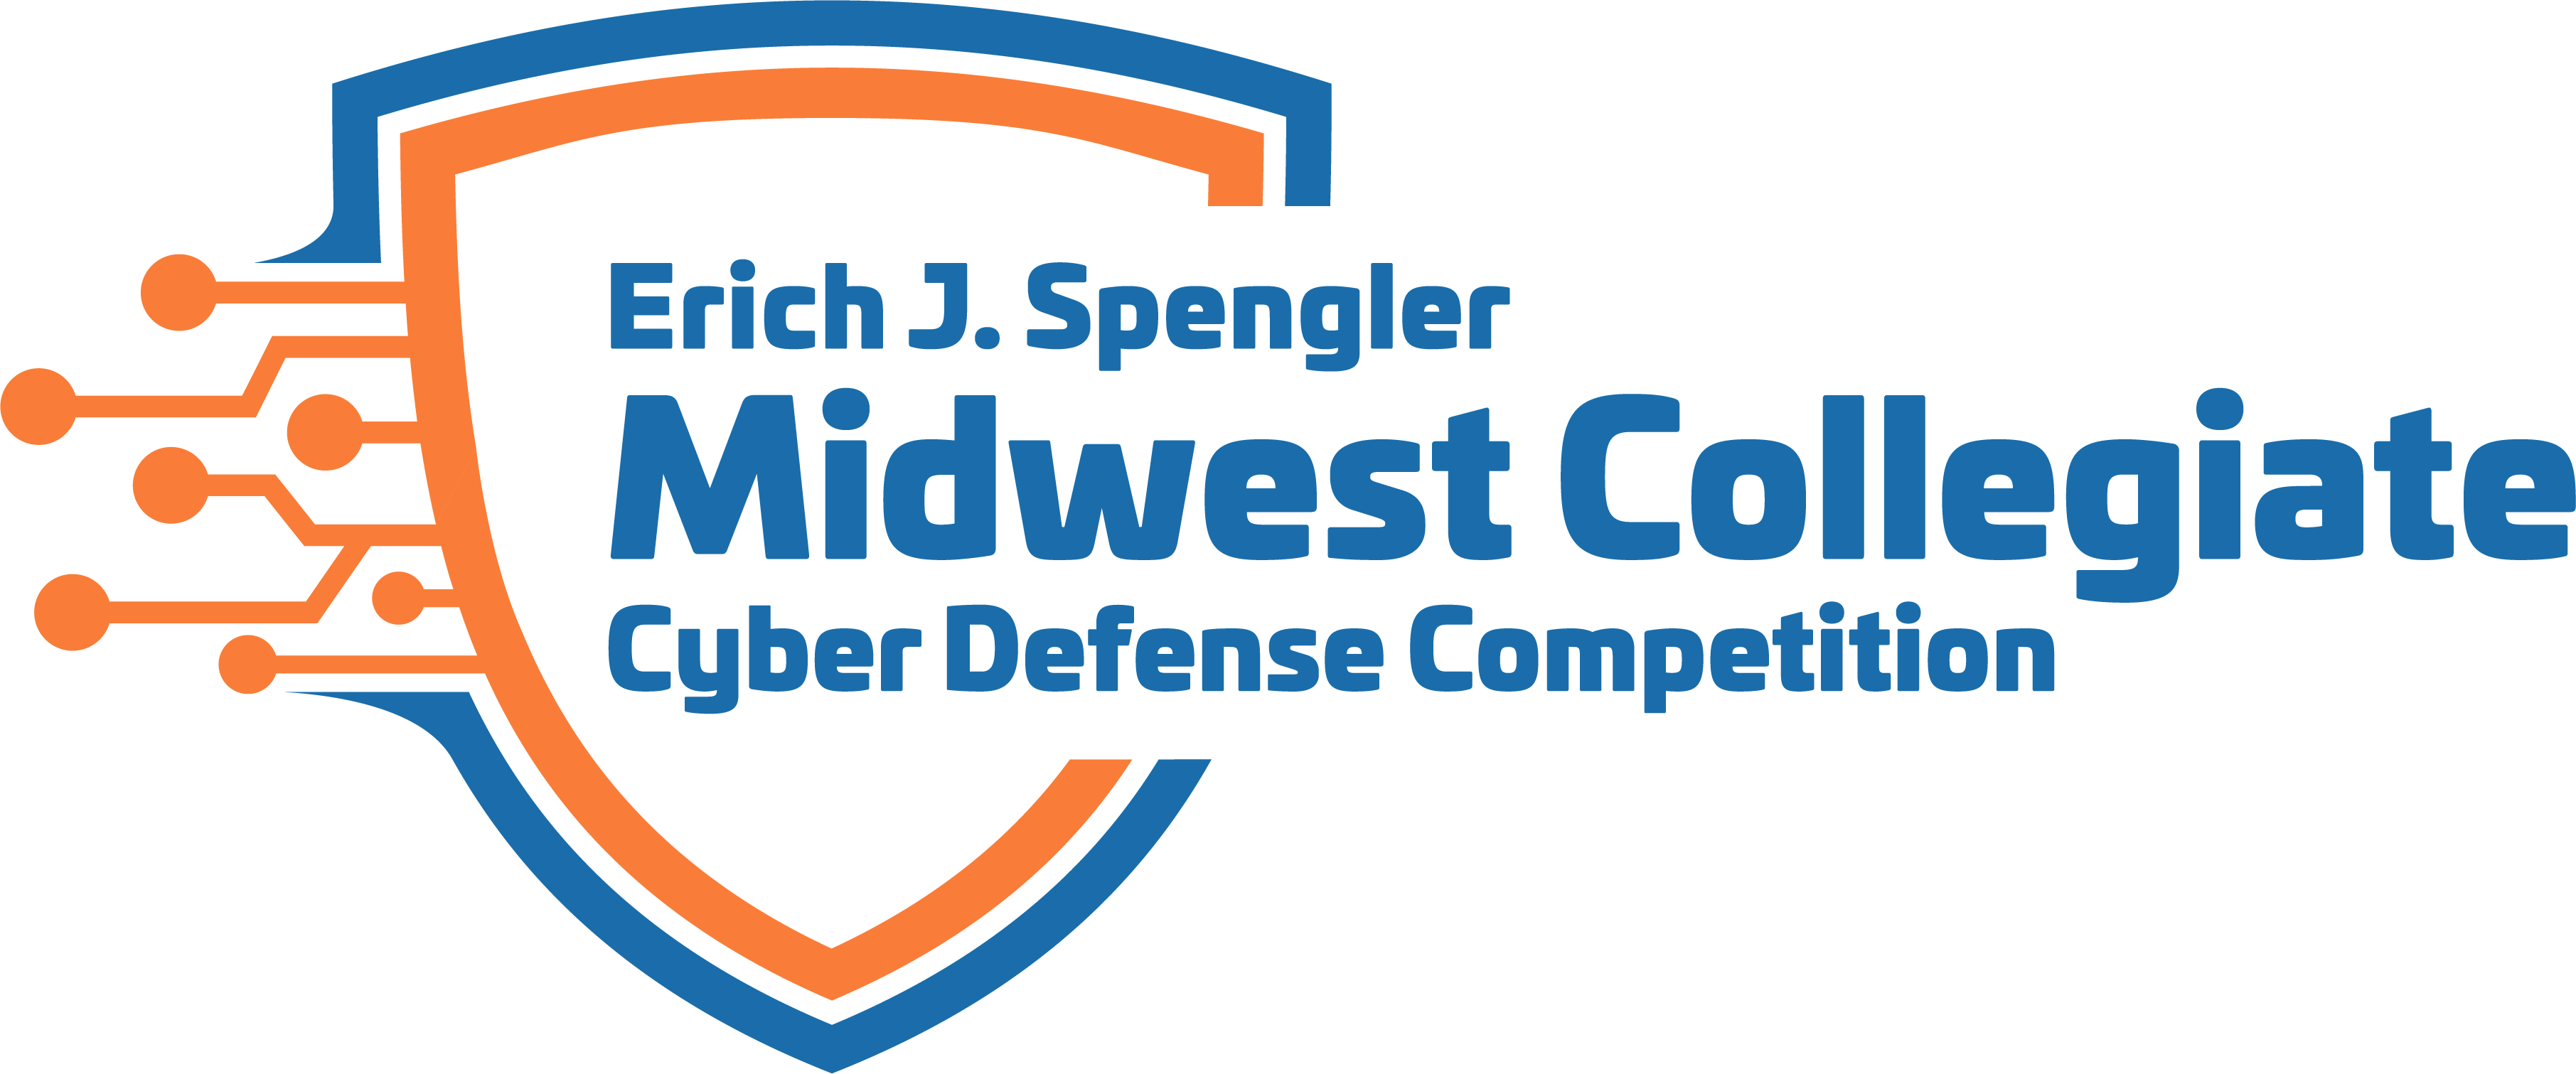 Mid-West Regional Collegiate Cyber Defense Competition MWCCDC)